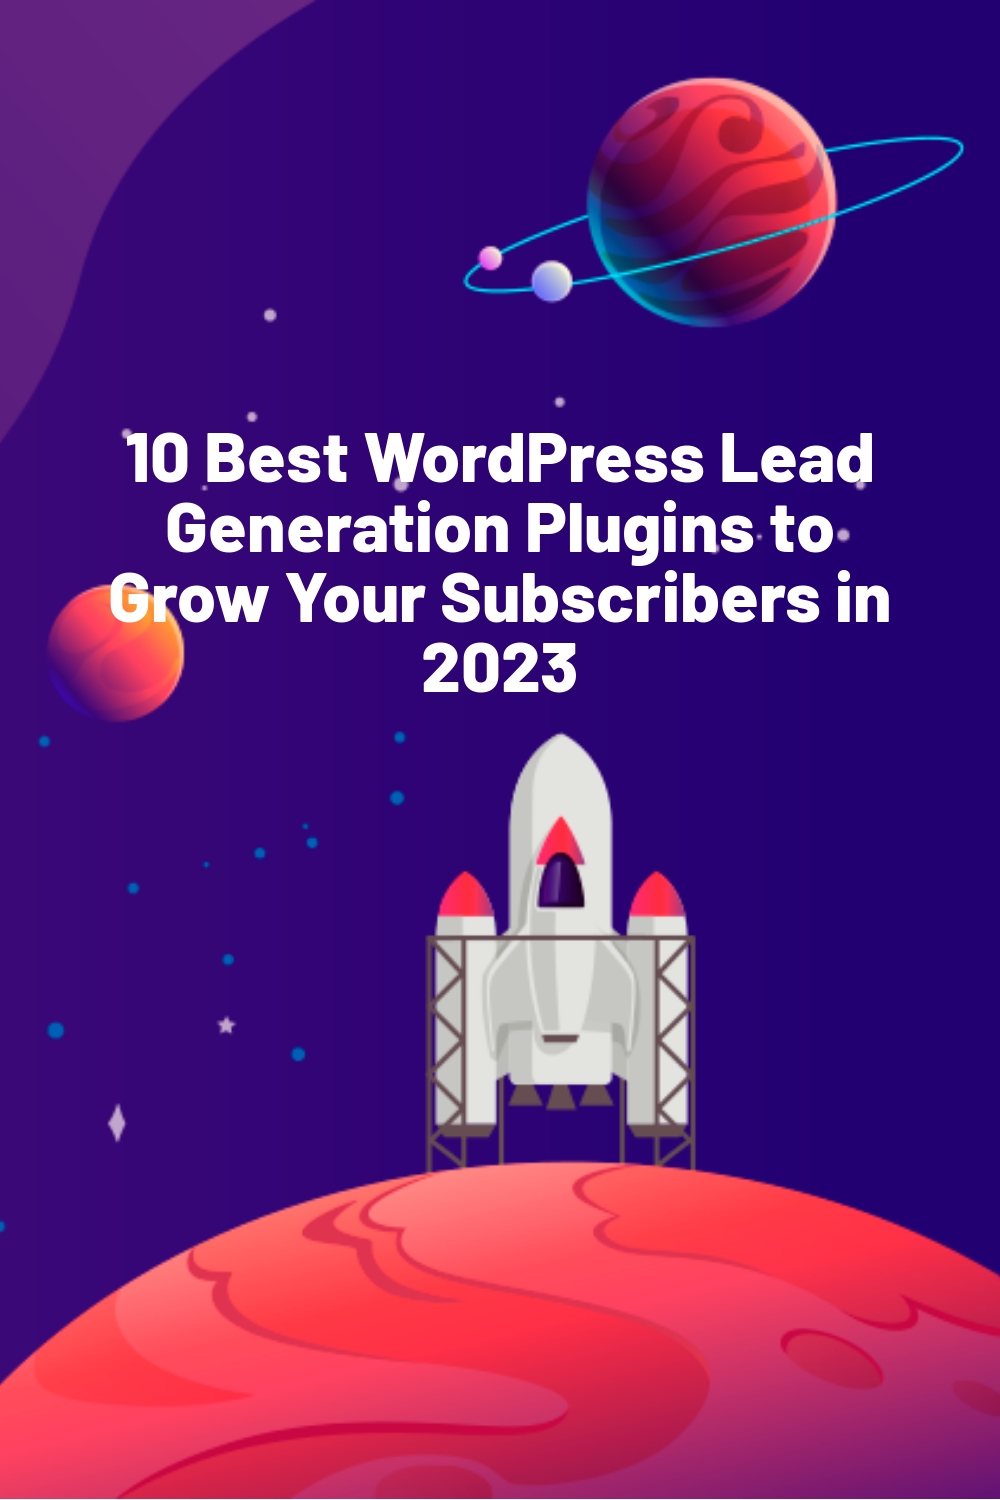 10 Best WordPress Lead Generation Plugins to Grow Your Subscribers in 2023